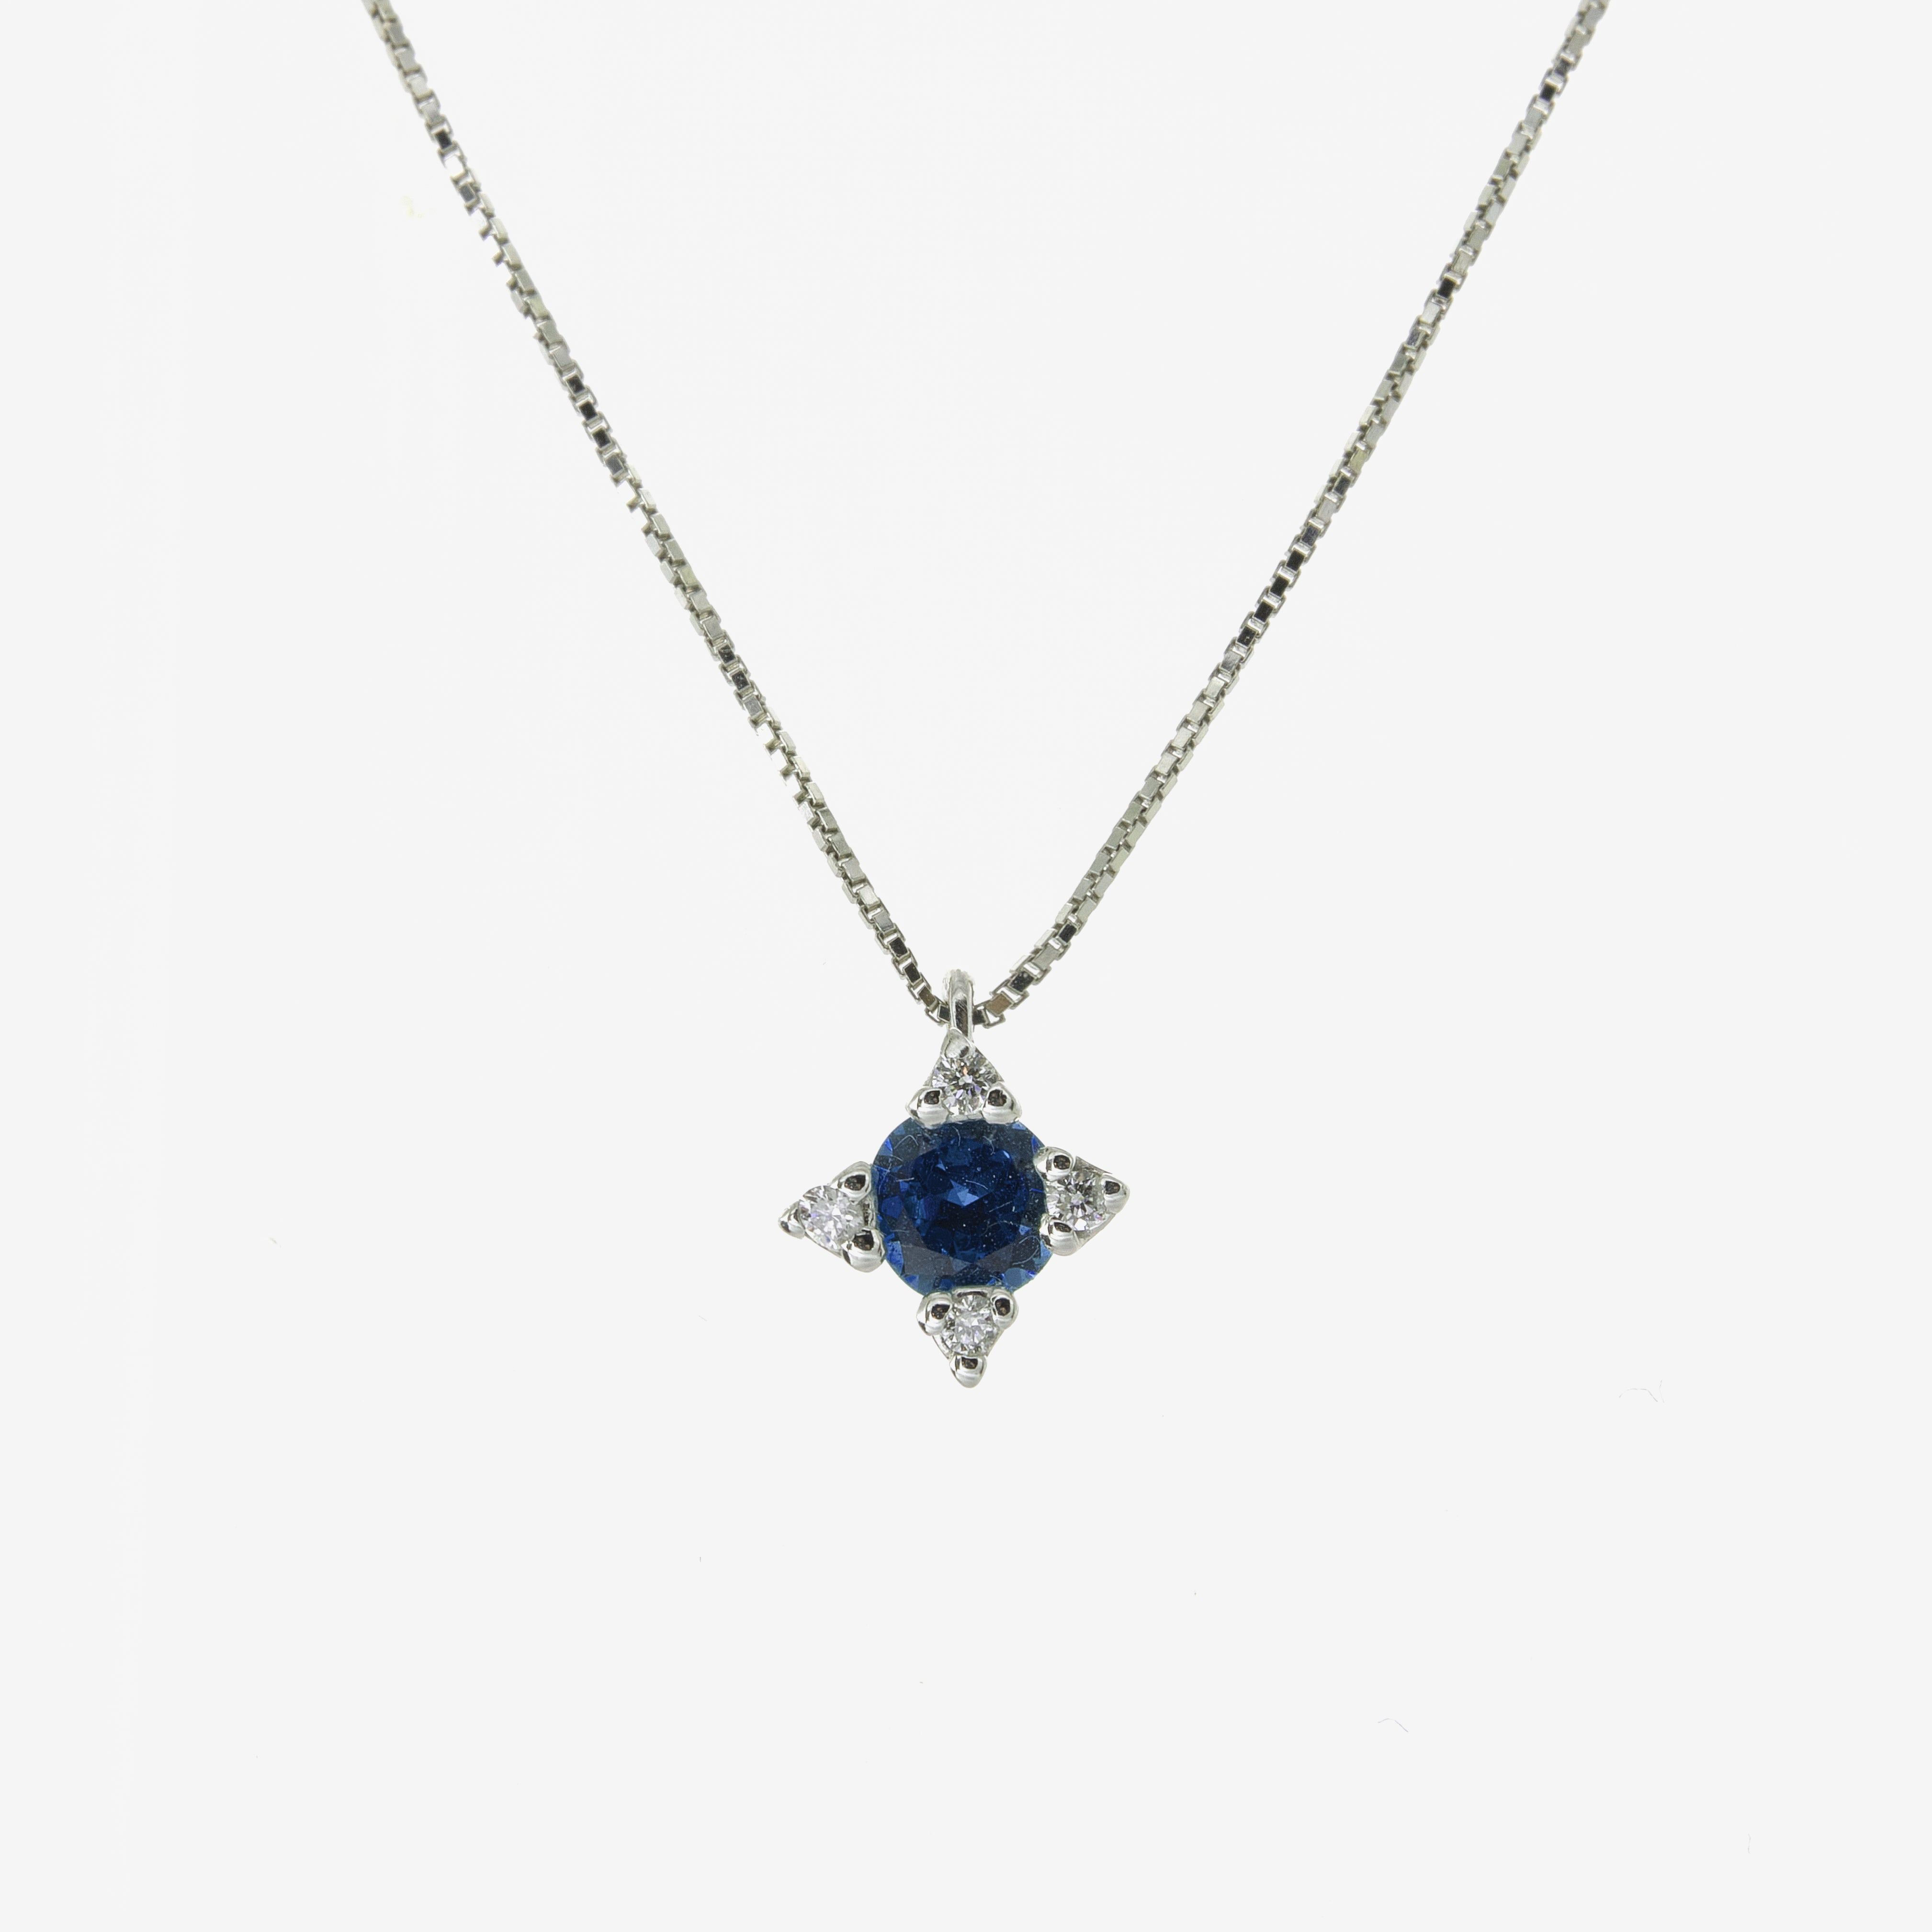 Star necklace with sapphire